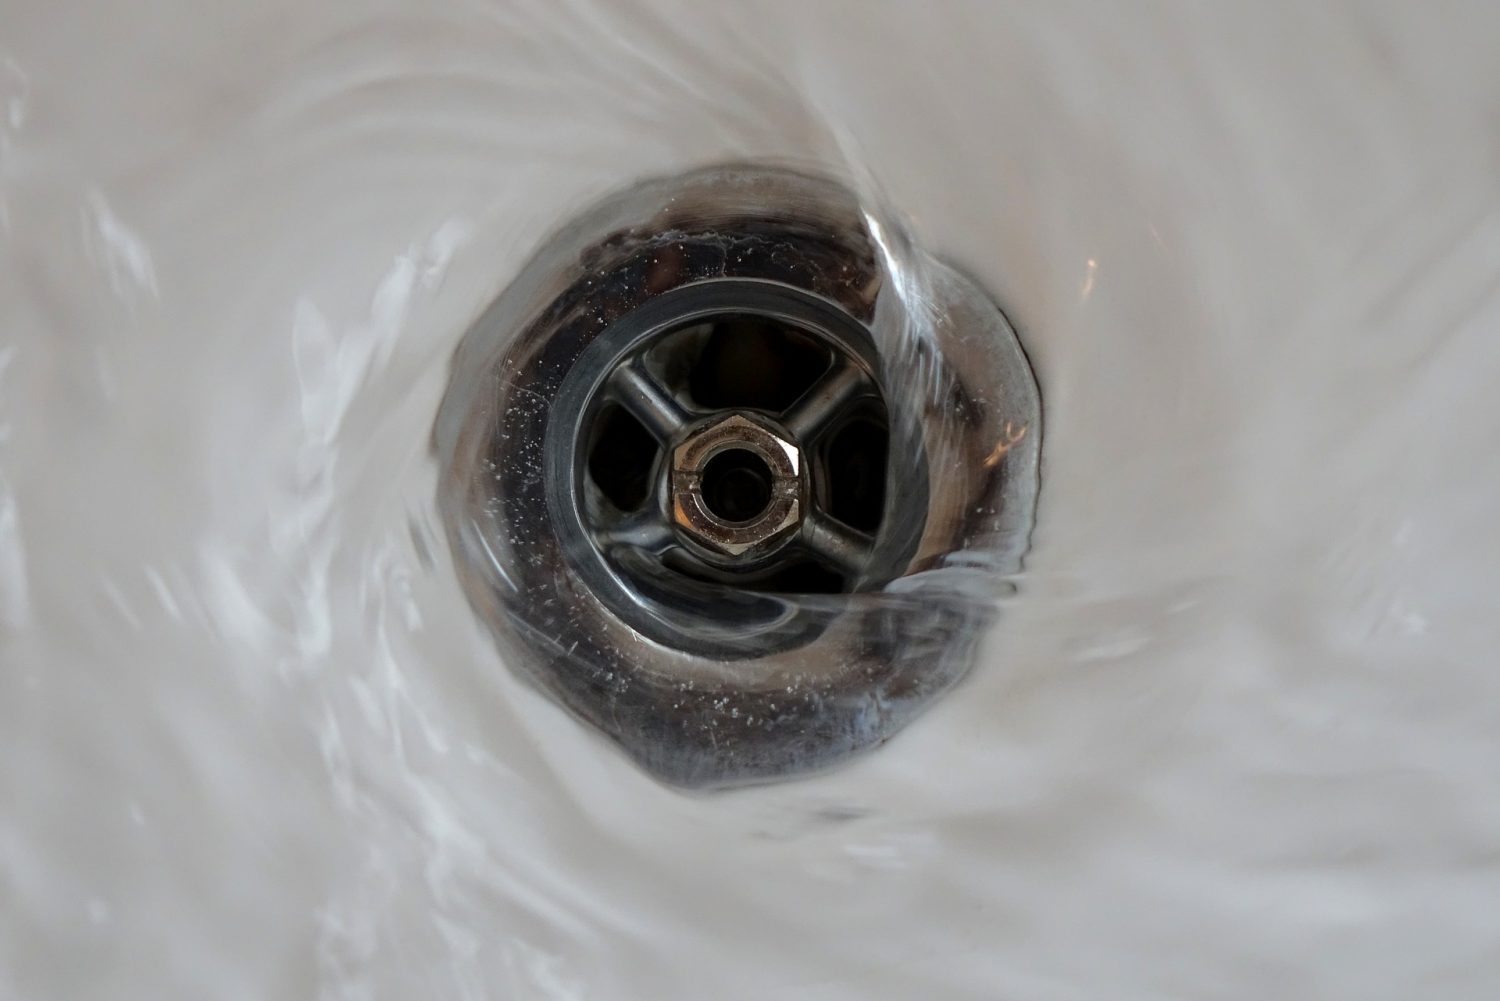 In A Hairy Situation? Follow These DIY Tips For Unclogging The Drain